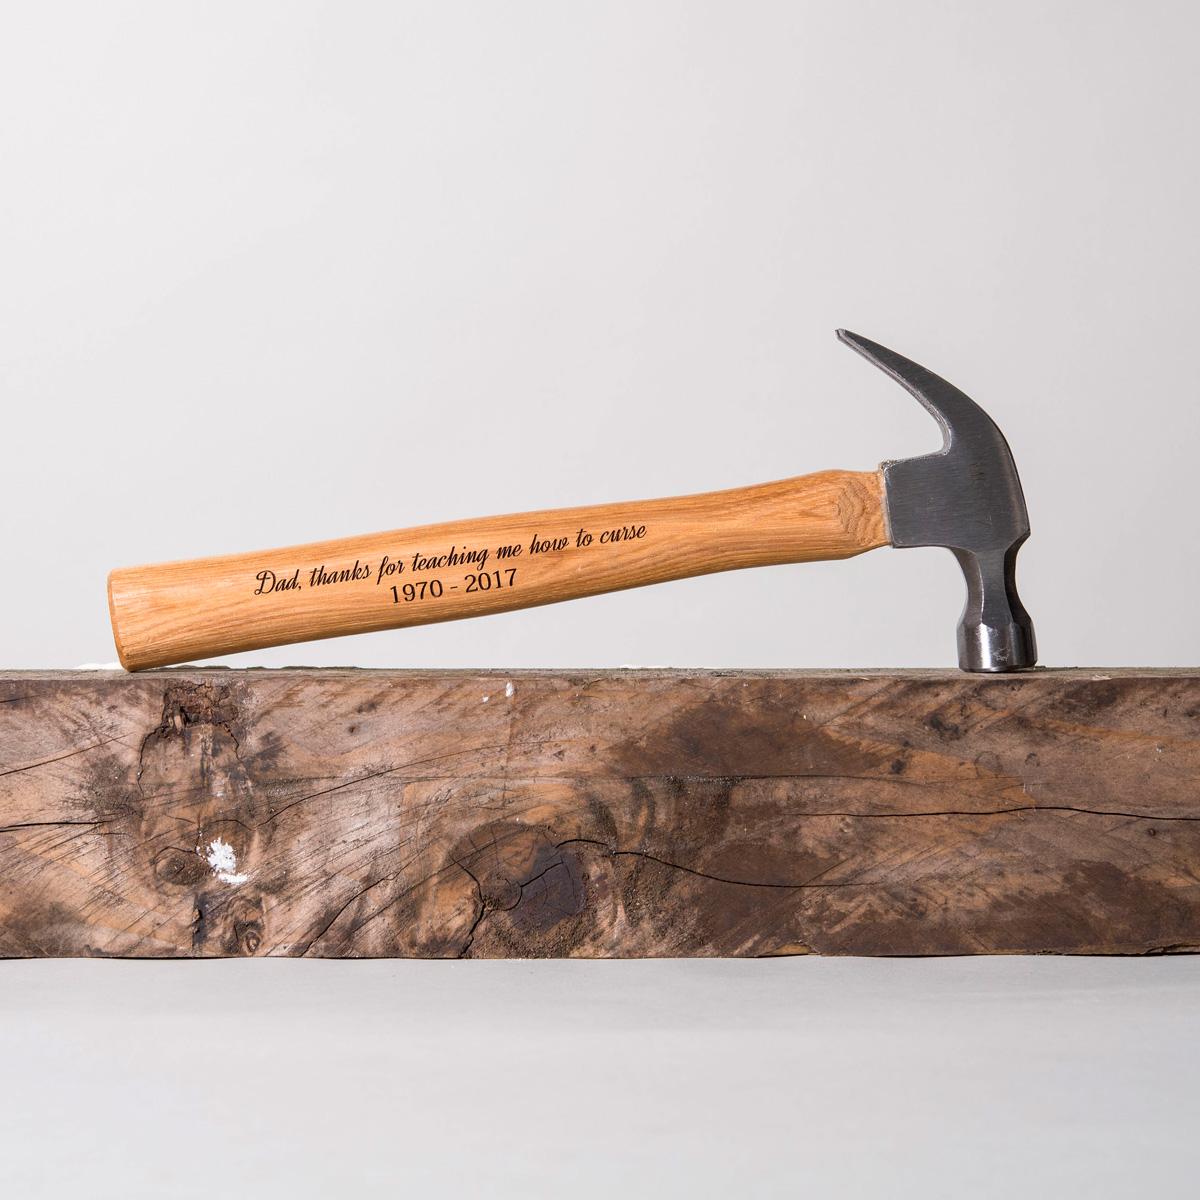 Personalised Engraved Wooden Hammer - Any Message